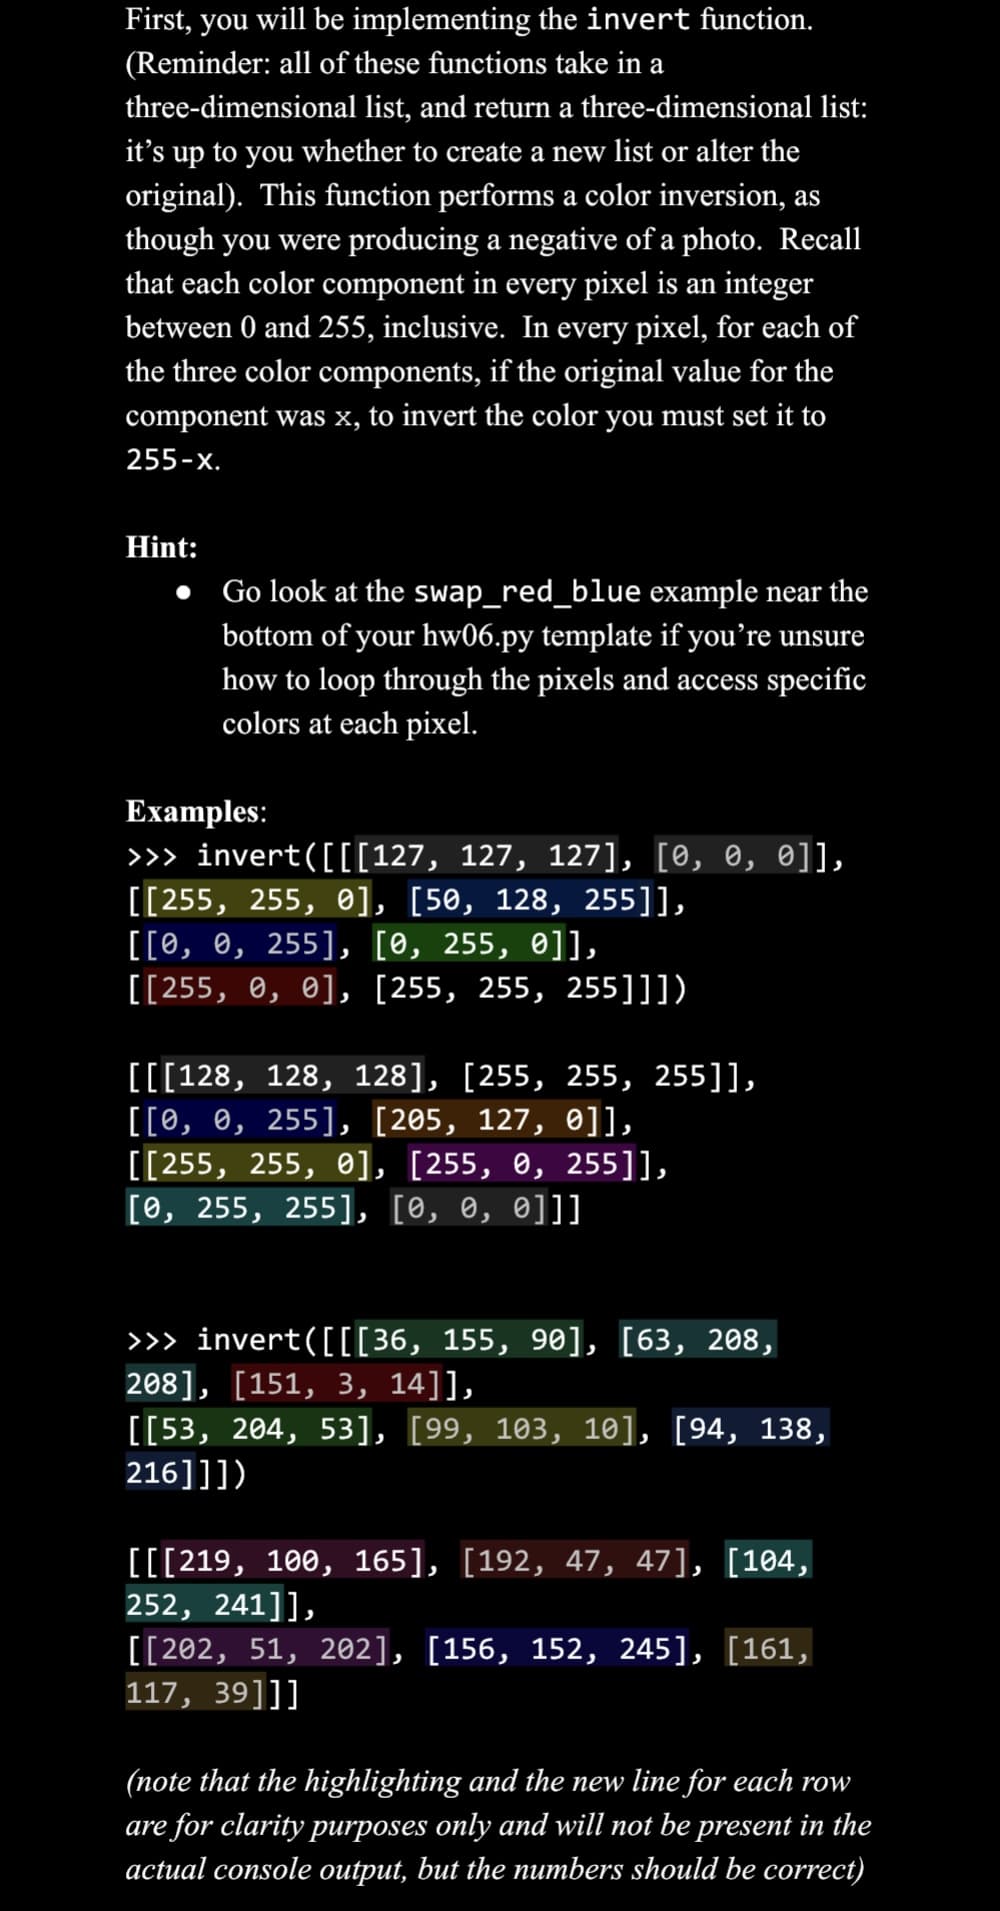 First, you will be implementing the invert function.
(Reminder: all of these functions take in a
three-dimensional list, and return a three-dimensional list:
it's up to you whether to create a new list or alter the
original). This function performs a color inversion, as
though you were producing a negative of a photo. Recall
that each color component in every pixel is an integer
between 0 and 255, inclusive. In every pixel, for each of
the three color components, if the original value for the
component was x, to invert the color you must set it to
255-X.
Hint:
Go look at the swap_red_blue example near the
bottom of your hw06.py template if you're uns
unsure
how to loop through the pixels and access specific
colors at each pixel.
Examples:
>>> invert([[[127, 127, 127], [0, 0, 0]],
[[255, 255, 0], [50, 128, 255]],
[[0, 0, 255], [0, 255, 0]],
[[255, 0, 0], [255, 255, 255]]])
[[[128, 128, 128], [255, 255, 255]],
[[0, 0, 255], [205, 127, 0]],
[[255, 255, 0], [255, 0, 255]],
[0, 255, 255], [0, 0, 0]]]
>>> invert([[[36, 155, 90], [63, 208,
208], [151, 3, 14]],
[[53, 204, 53], [99, 103, 10], [94, 138,
216]]])
[[[219, 100, 165], [192, 47, 47], [104,
252, 241]],
[[202, 51, 202], [156, 152, 245], [161,
117, 39]]]
(note that the highlighting and the new line for each row
are for clarity purposes only and will not be present in the
actual console output, but the numbers should be correct)